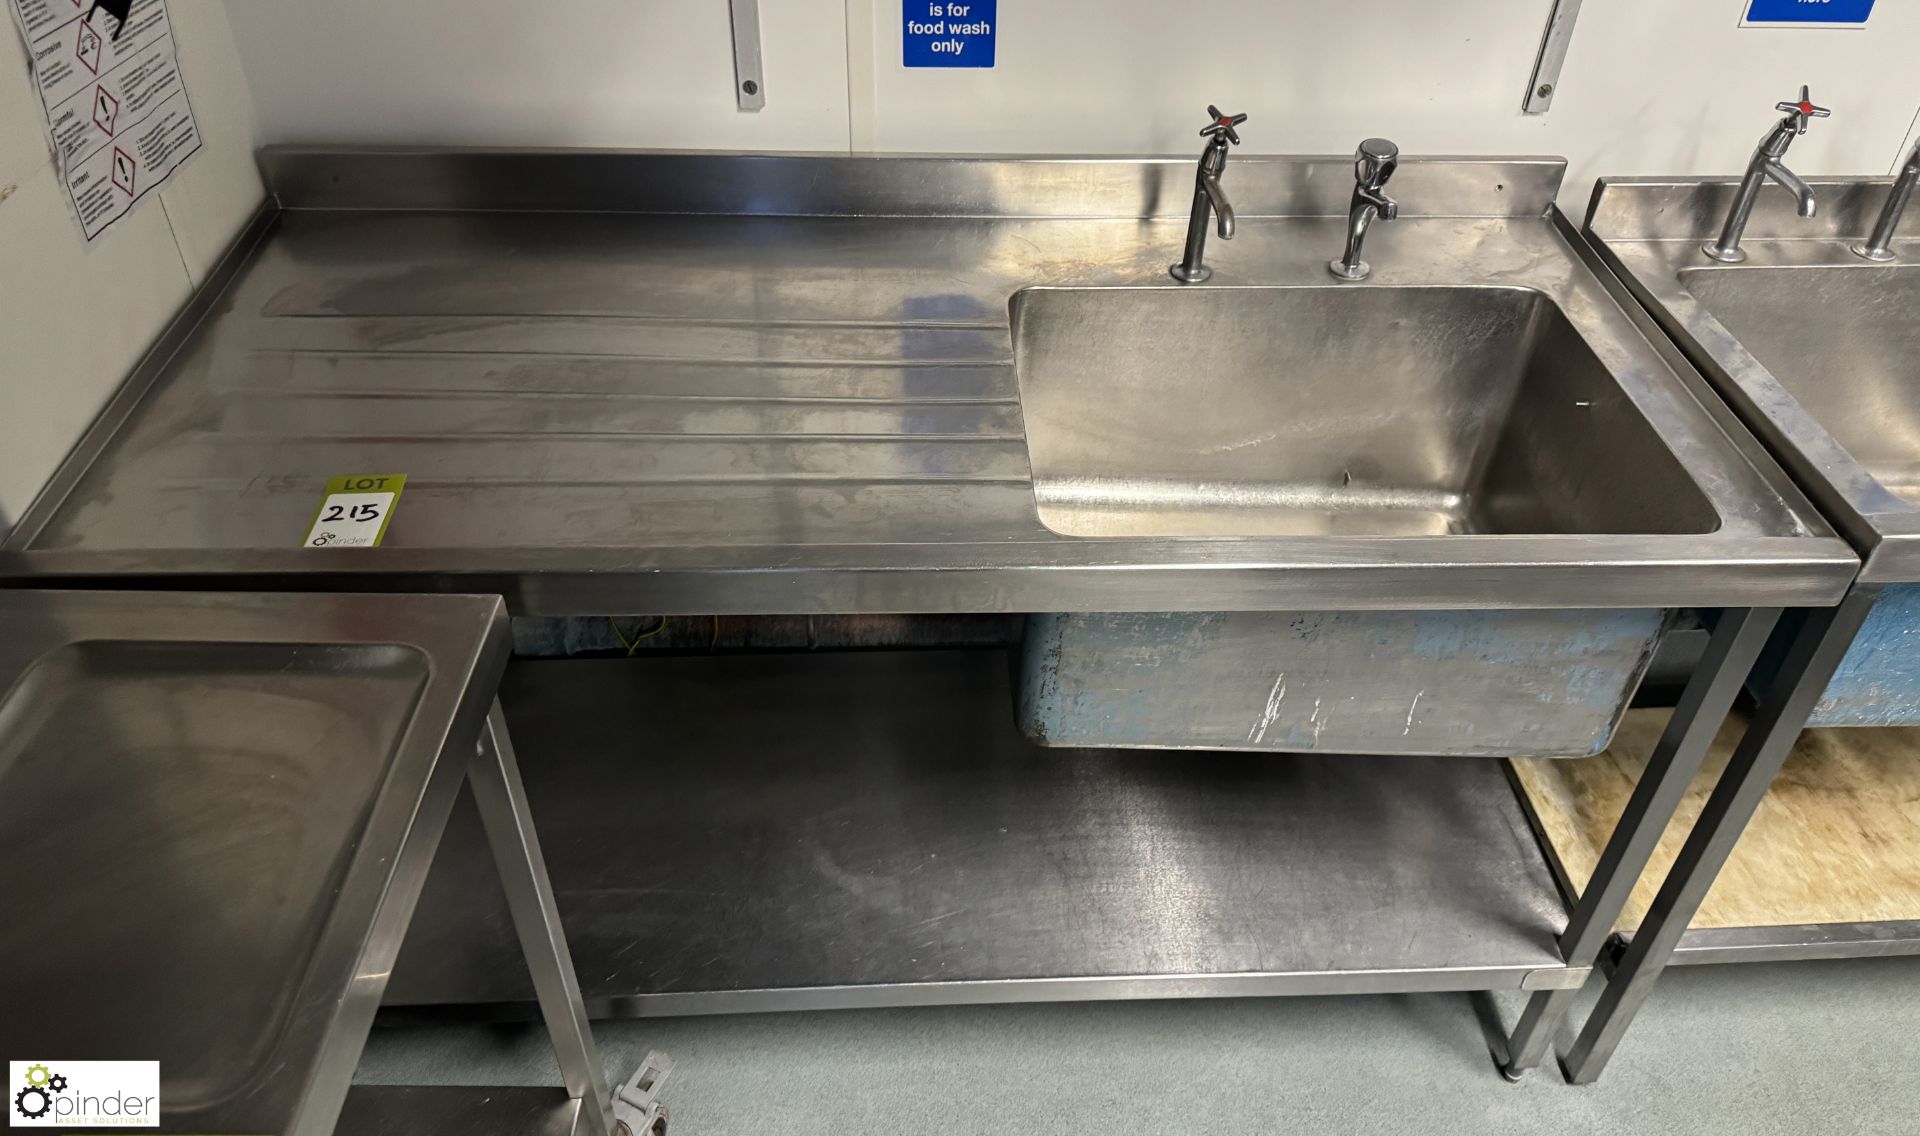 Stainless steel single bowl Sink, 1500mm x 700mm x 880mm (location in building - level 23 kitchen) - Image 2 of 4